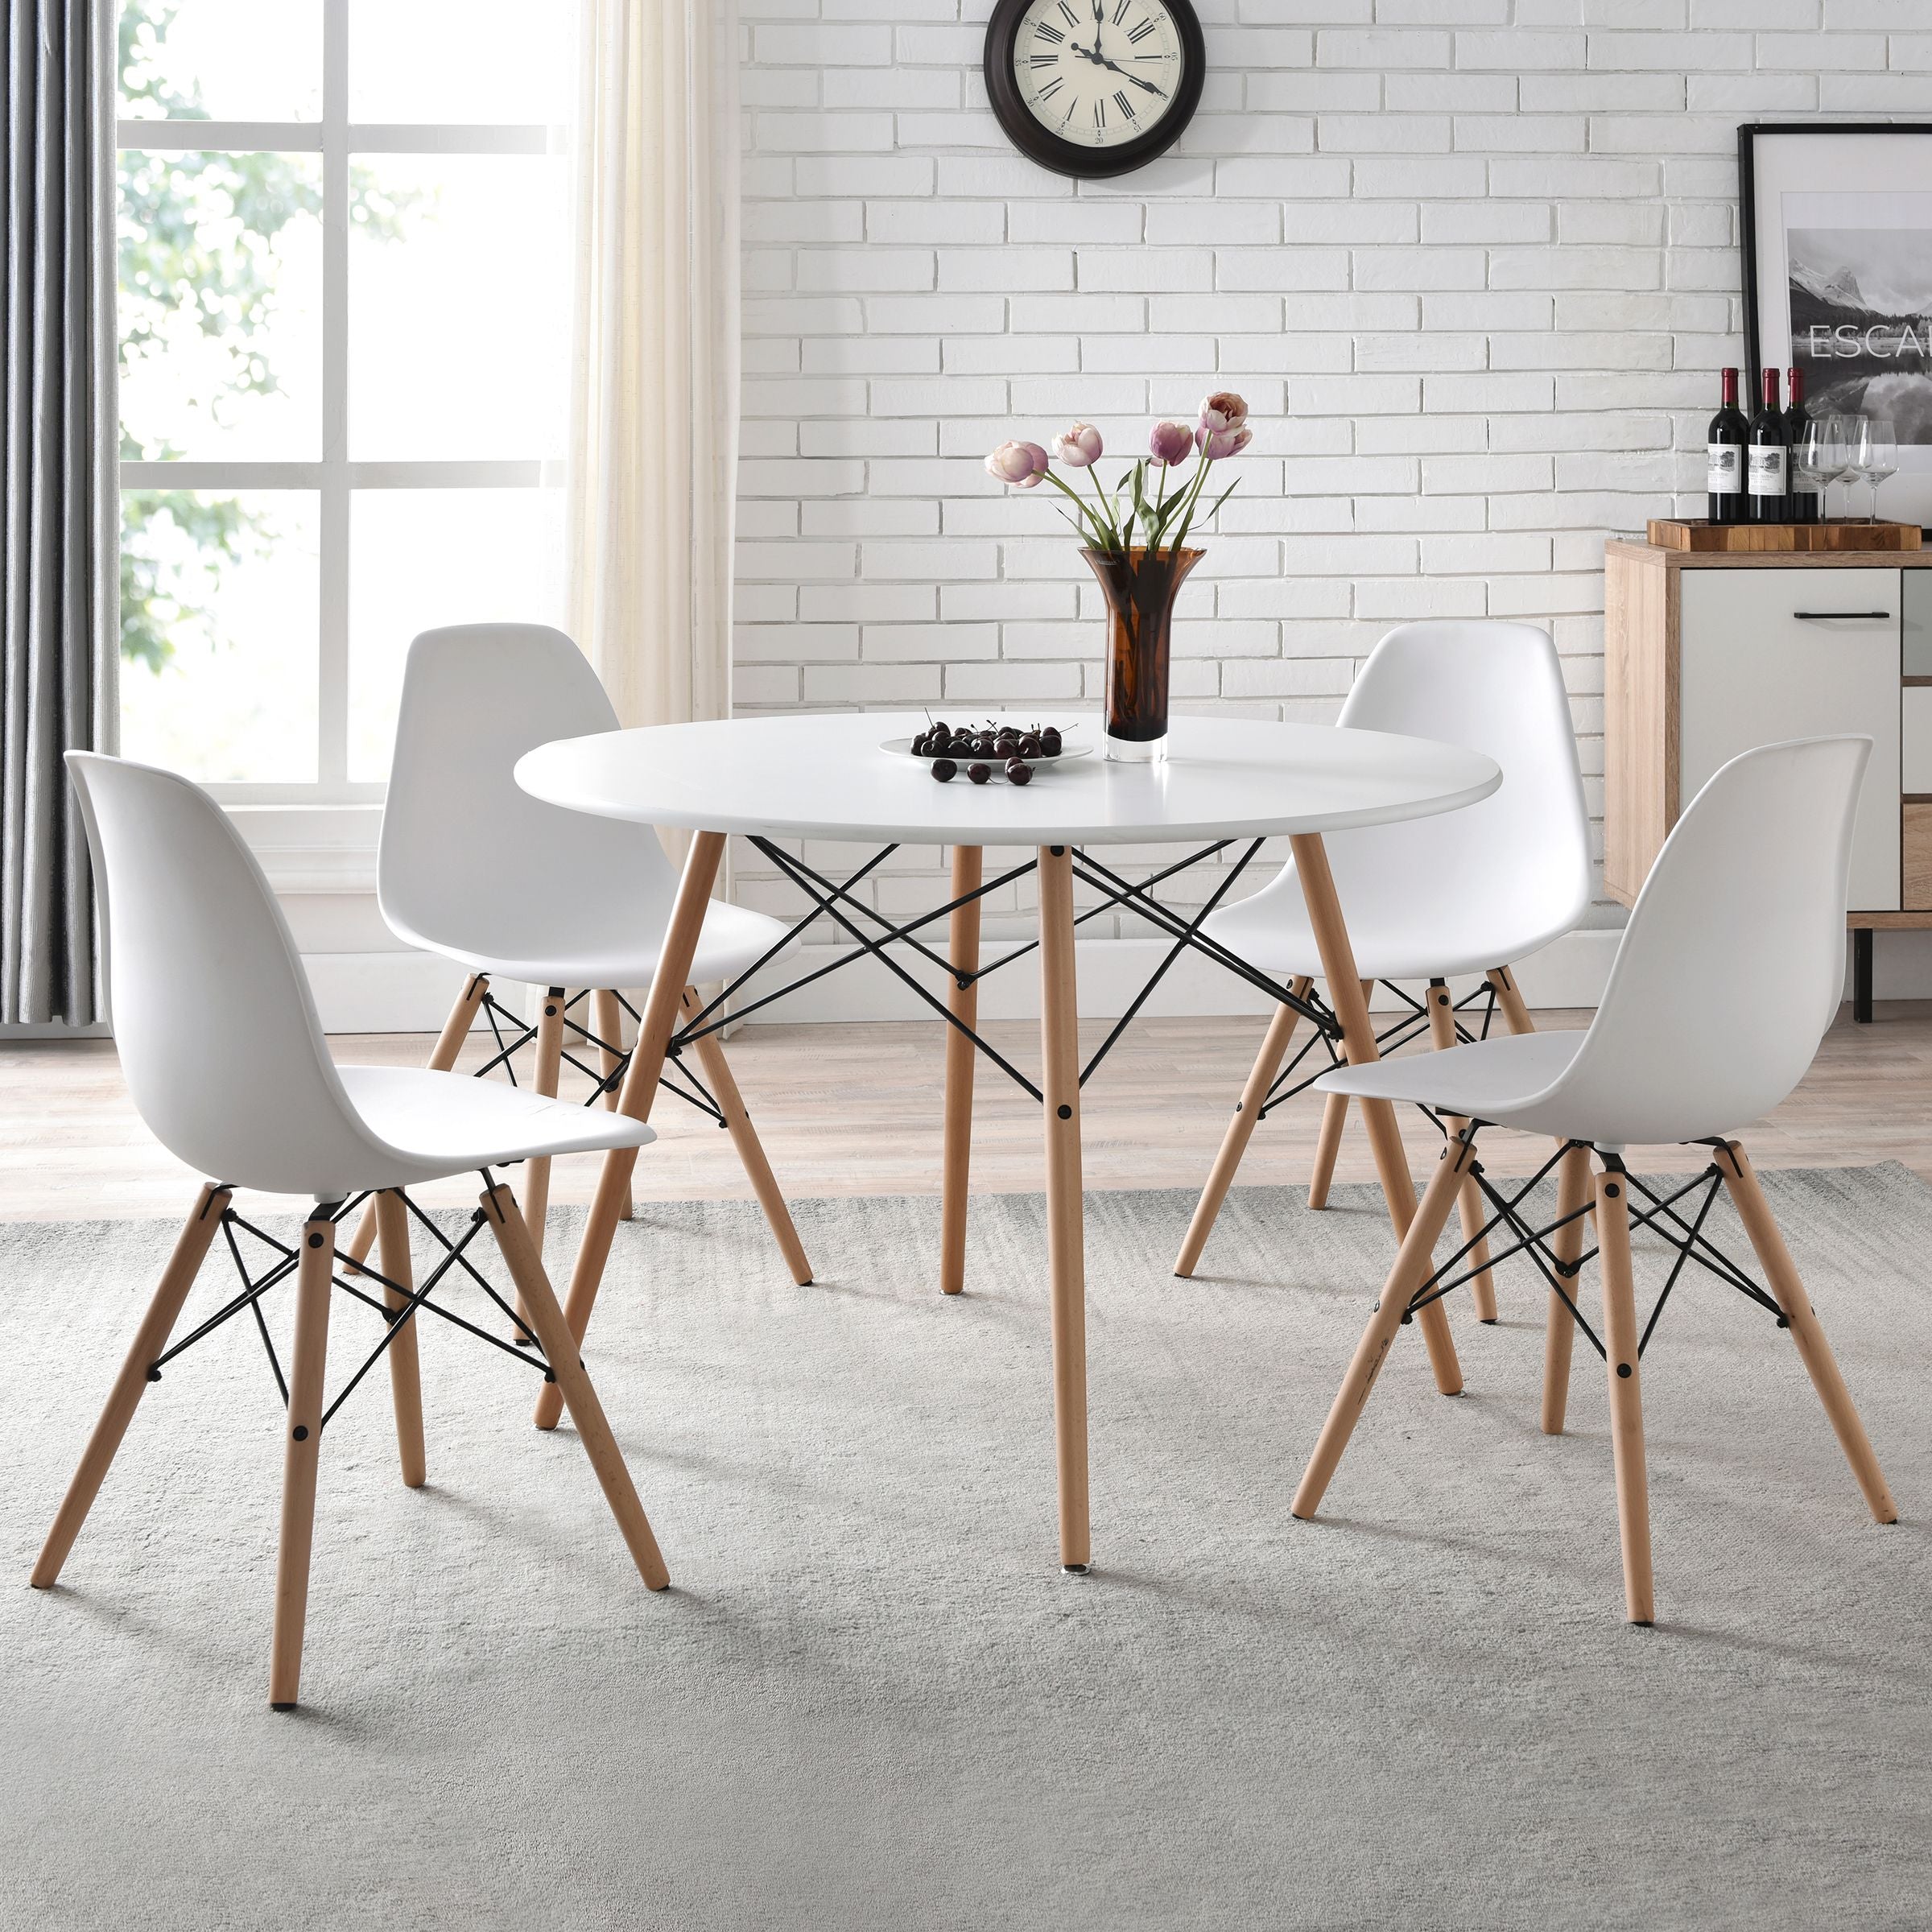 SKONYON Set of 4 Mid Century Modern Dining Chairs w/ Wood Legs, Molded Plastic Shell - White